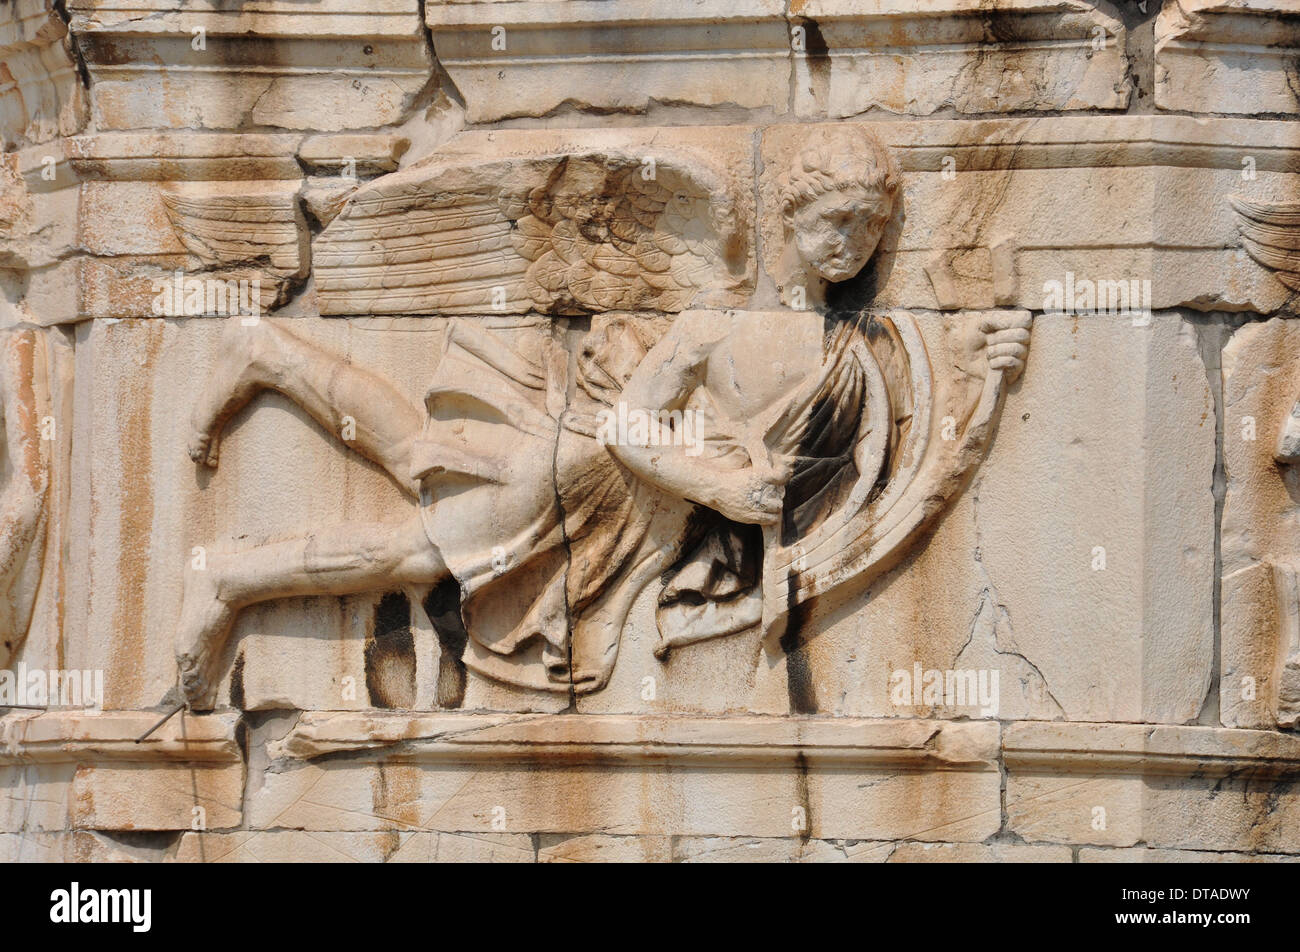 Tower of the Winds frieze detail of wind god pushing the stern of a ship. Ancient Agora, Athens Greece. Stock Photo